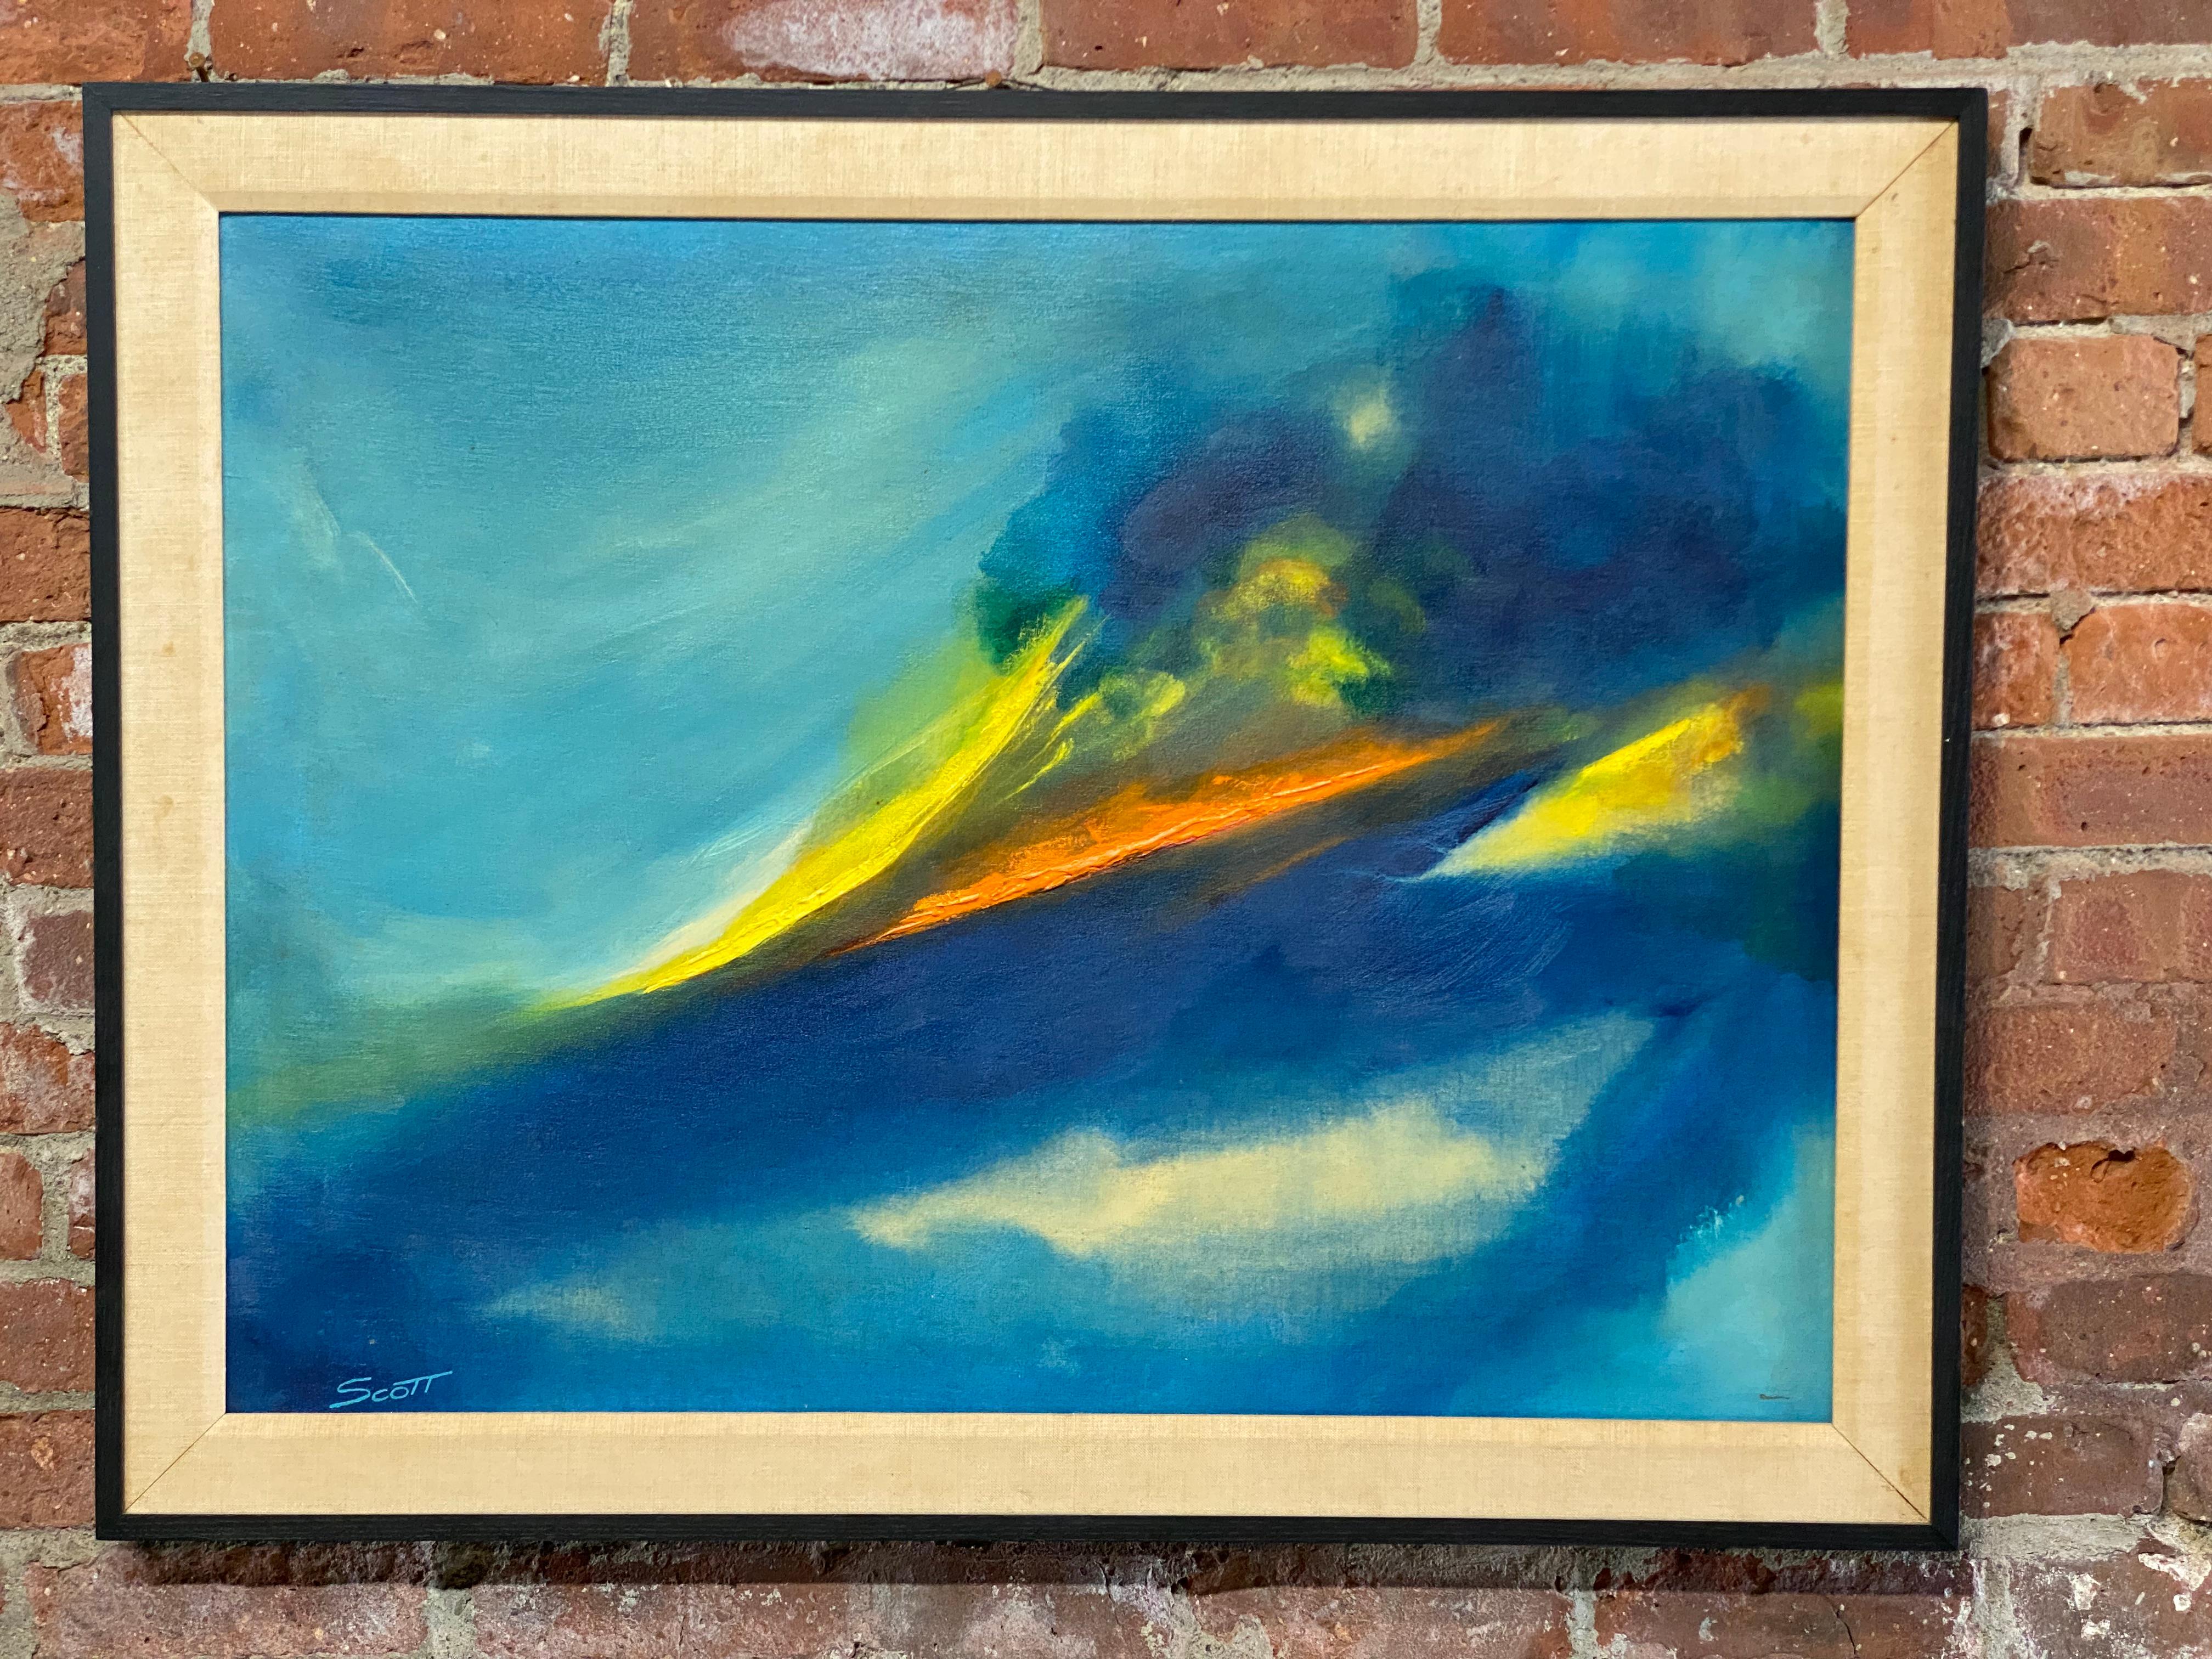 Signed Scott lower left corner. Acrylic paint and mixed media on stretched canvas. Circa 1970. Beautiful abstract wave of color. Phenomenal expressive brushwork and use of highly bright and saturated impasto colors of yellow and and orange. The